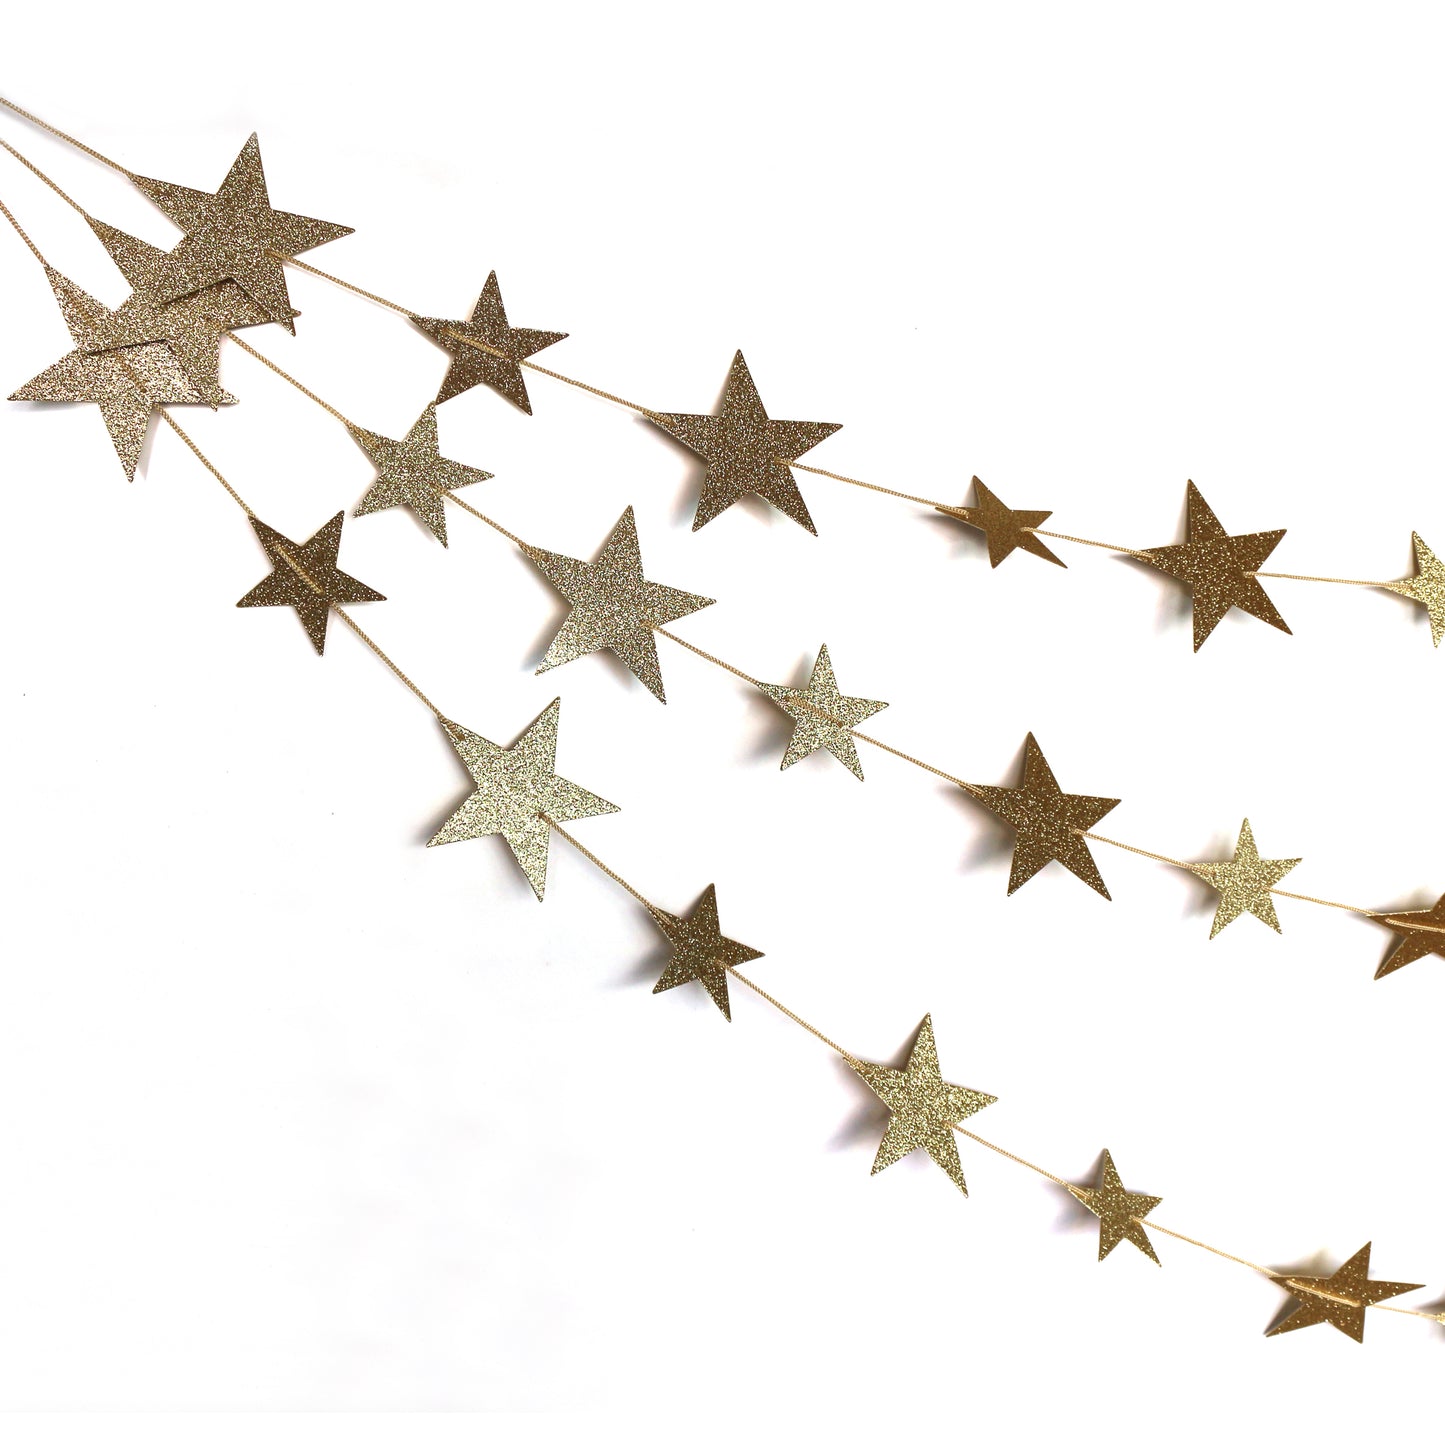 CVHOMEDECO. Twinkle Glittered Paper Star String Star Garland Unique Hanging Bunting Banner for Wedding Birthday Party Festival Home Background Decoration, 5.5 feet, Pack of 2 PCS (Golden)